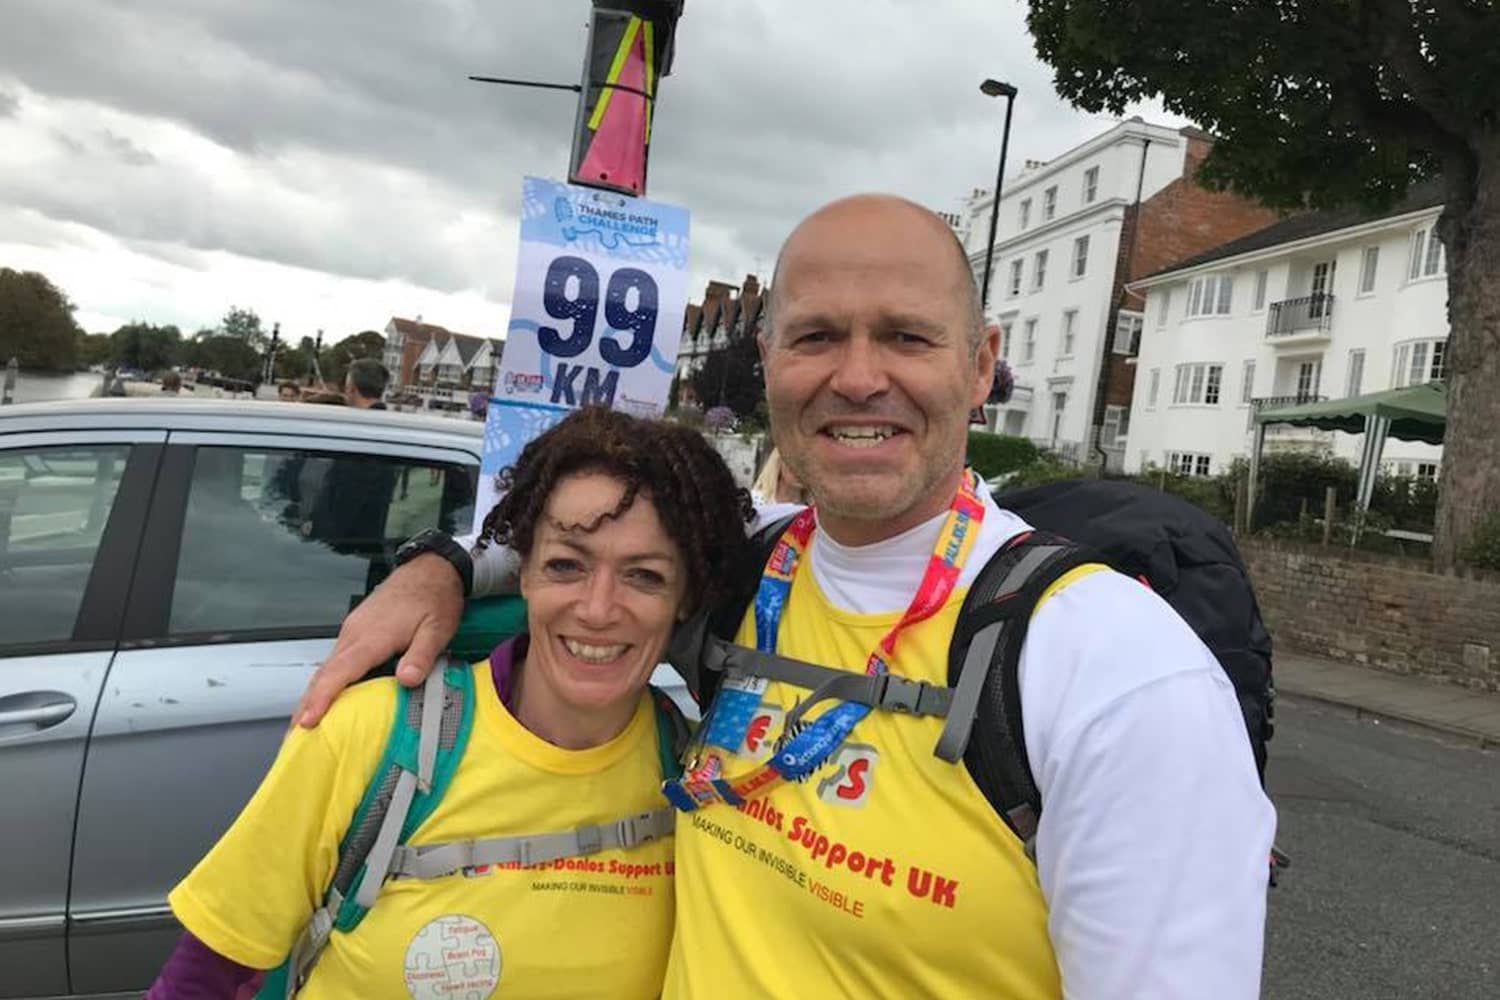 Gripsure team member, Jo, takes on the Thames Path Challenge for charity